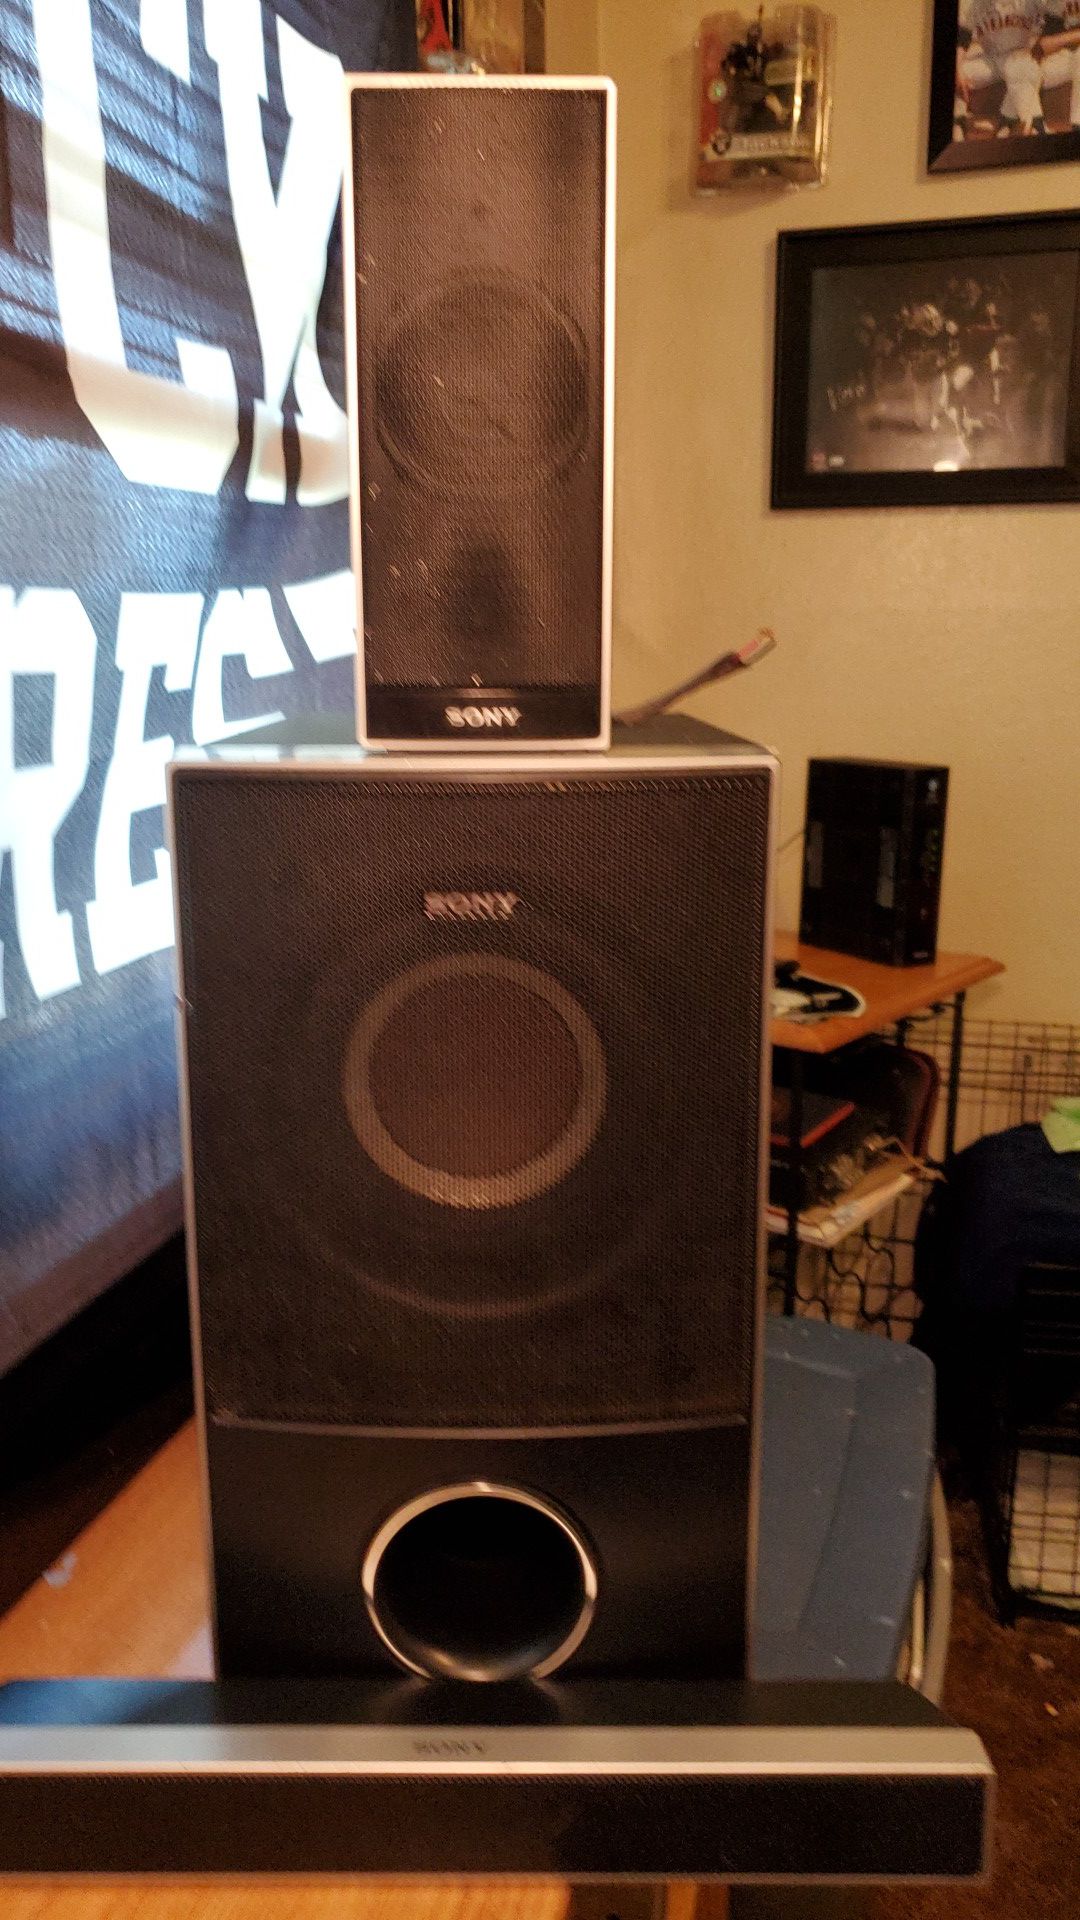 Sony HTS speakers 3 total